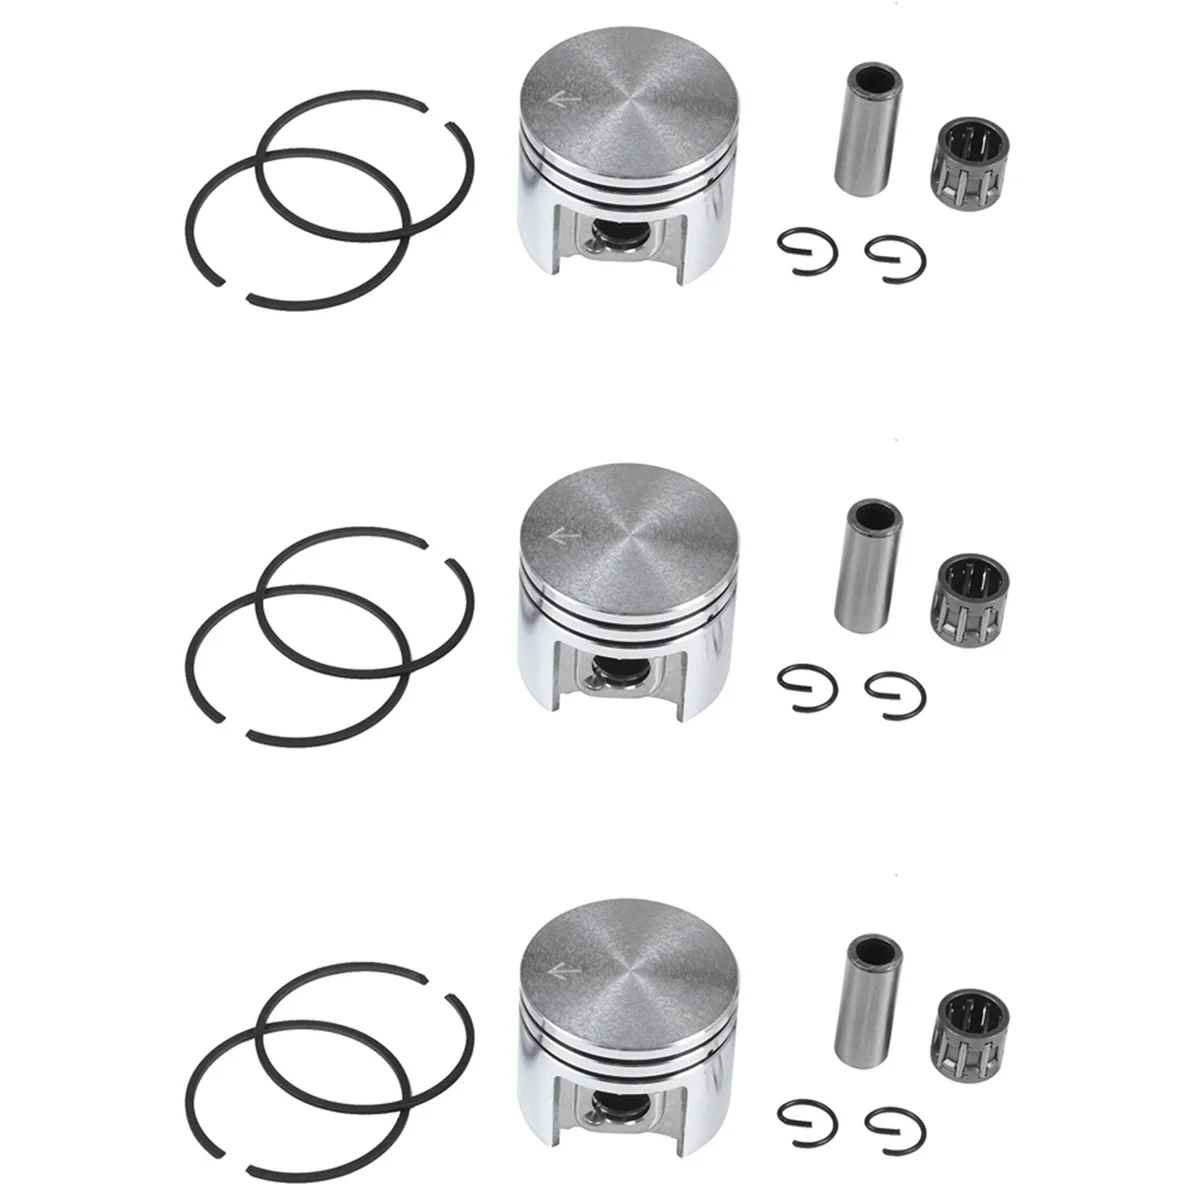 

3set 38mm Piston & Rings 10mm Pin Needle Bearing Kit Fit for Stihl Ms180 018 180 Chainsaw